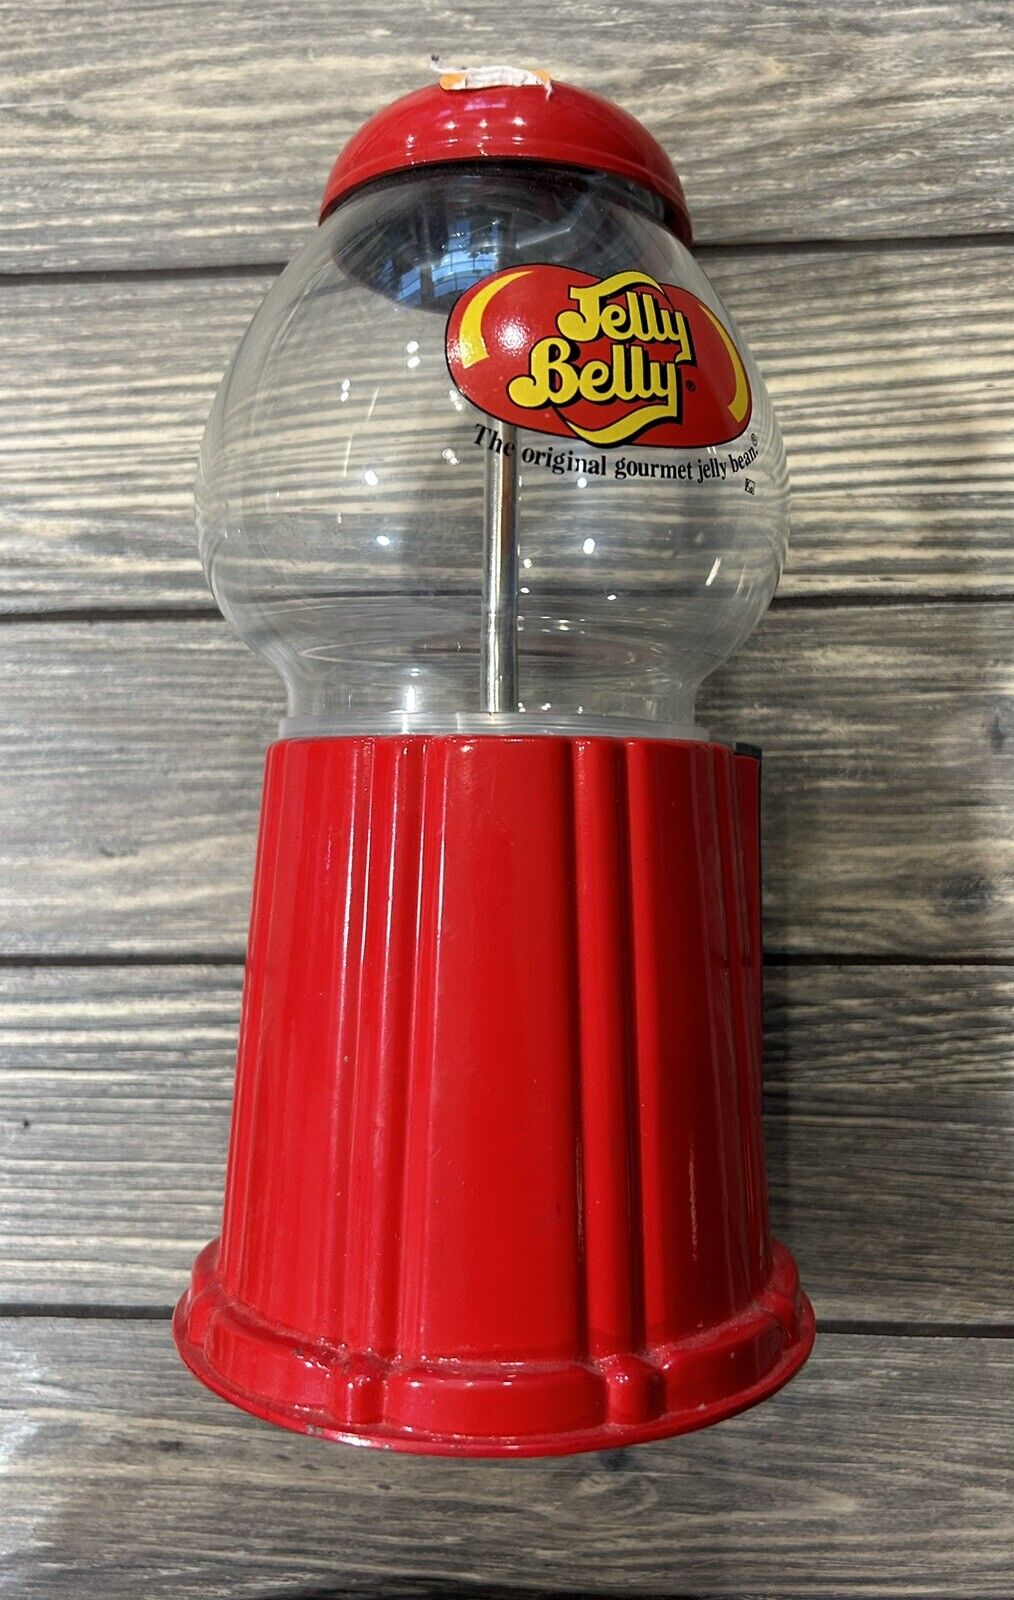 Vintage Jelly Belly Jelly Bean Machine 9.5”